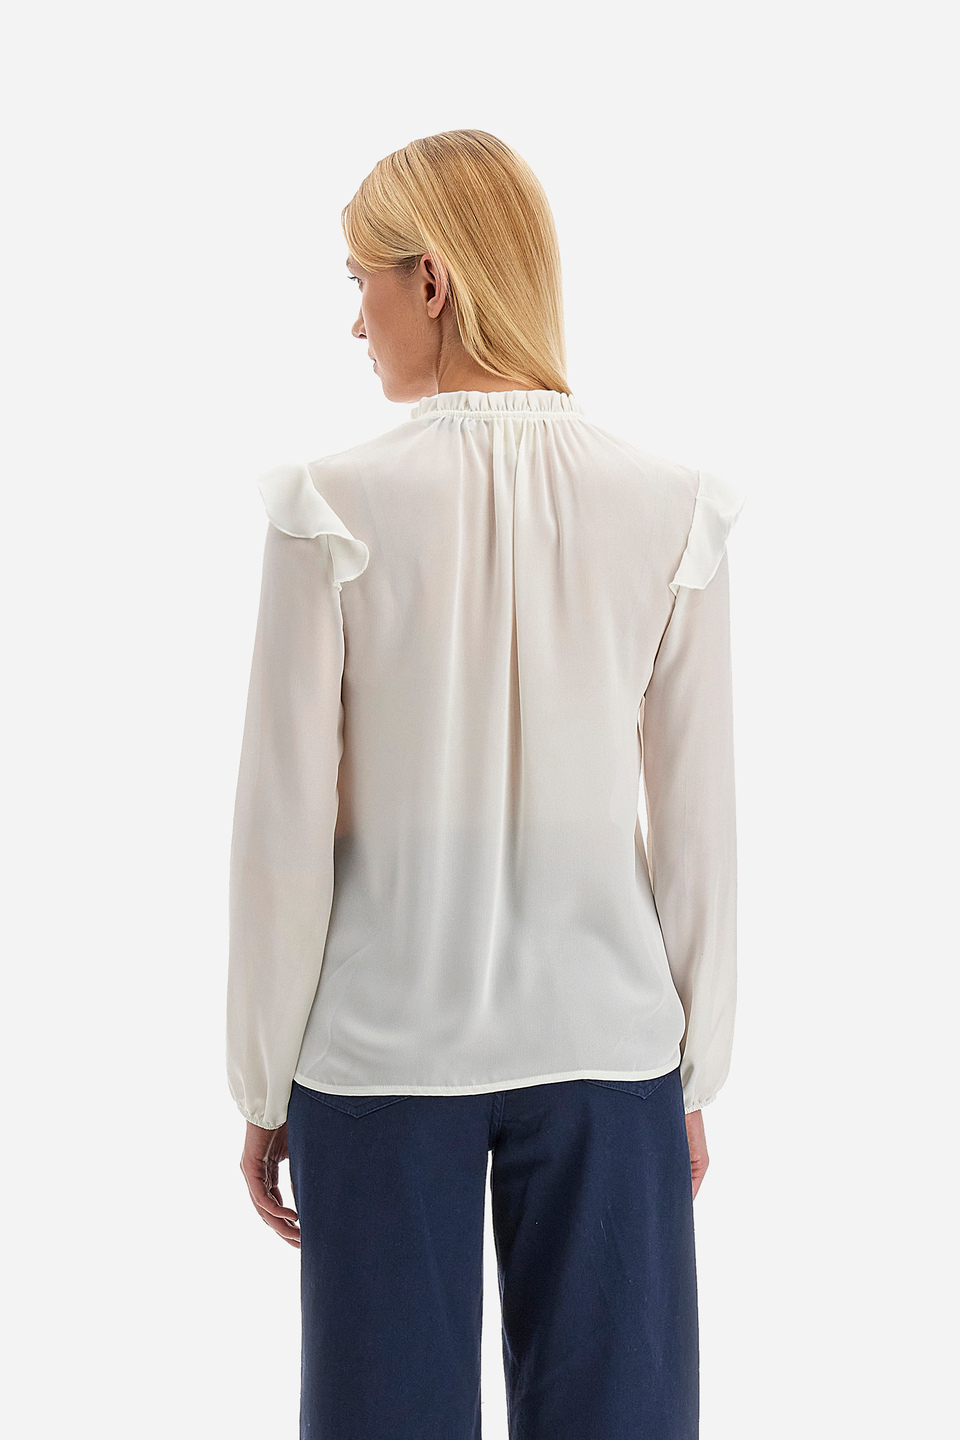 Women's long-sleeved shirt in solid color and georgette fabric Spring Weekend - Ville | La Martina - Official Online Shop